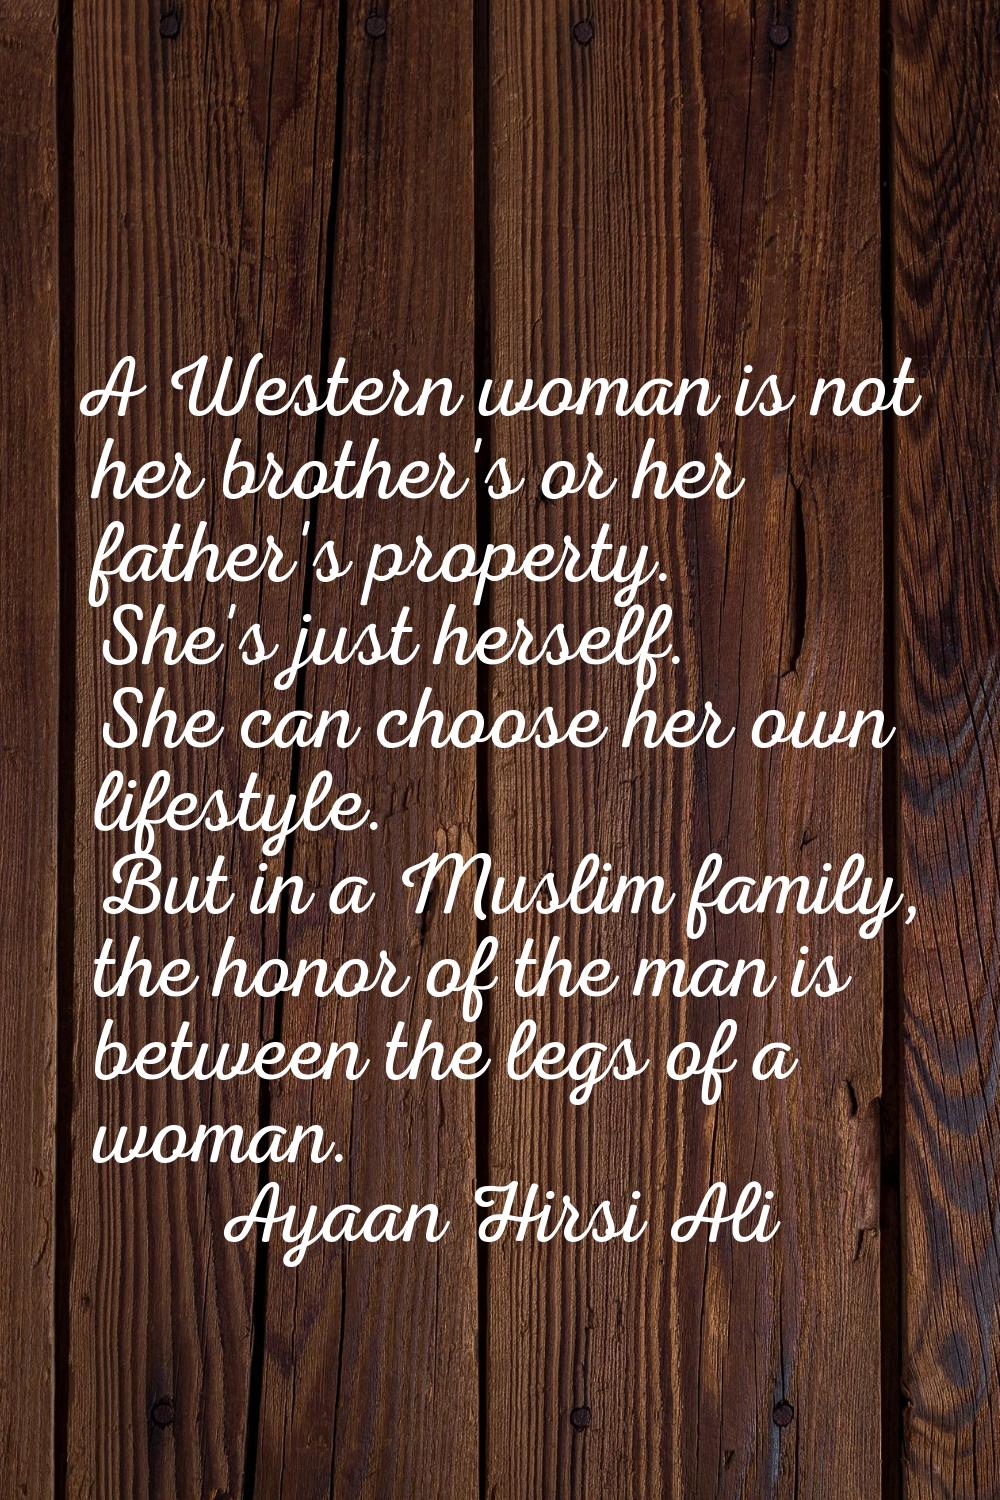 A Western woman is not her brother's or her father's property. She's just herself. She can choose h